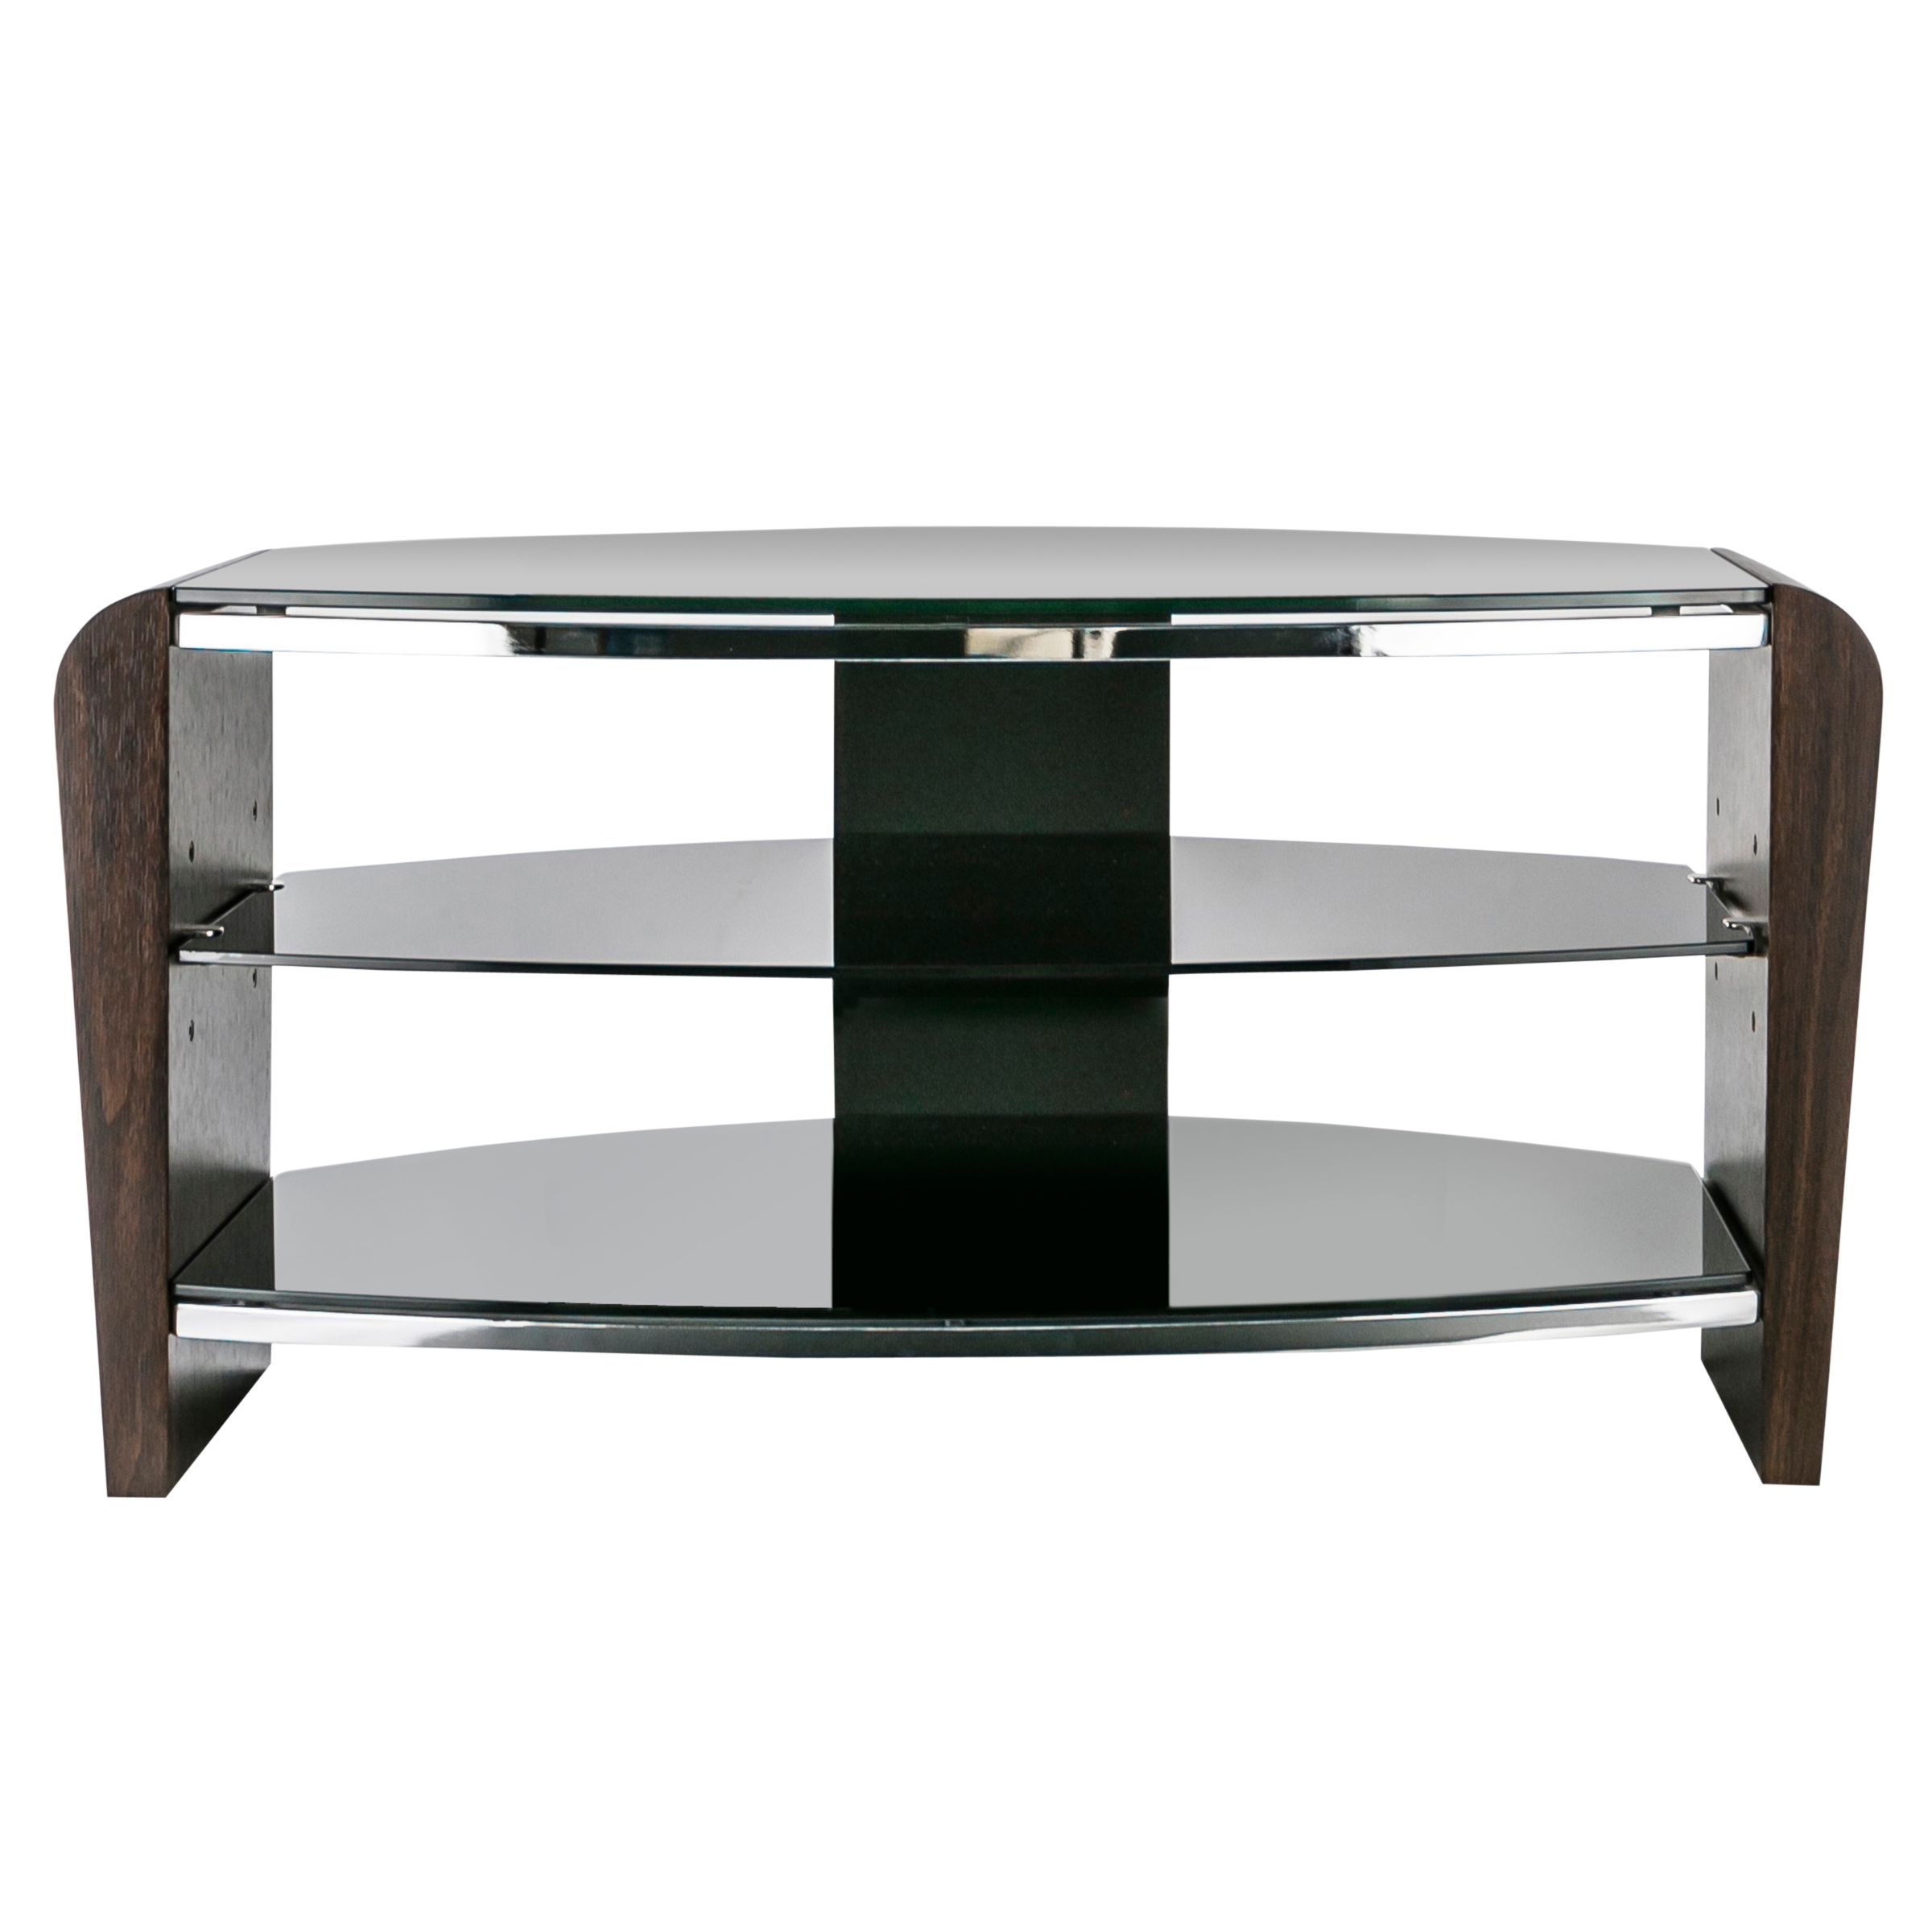 Alphason Francium 80 TV Stand for up to 37"